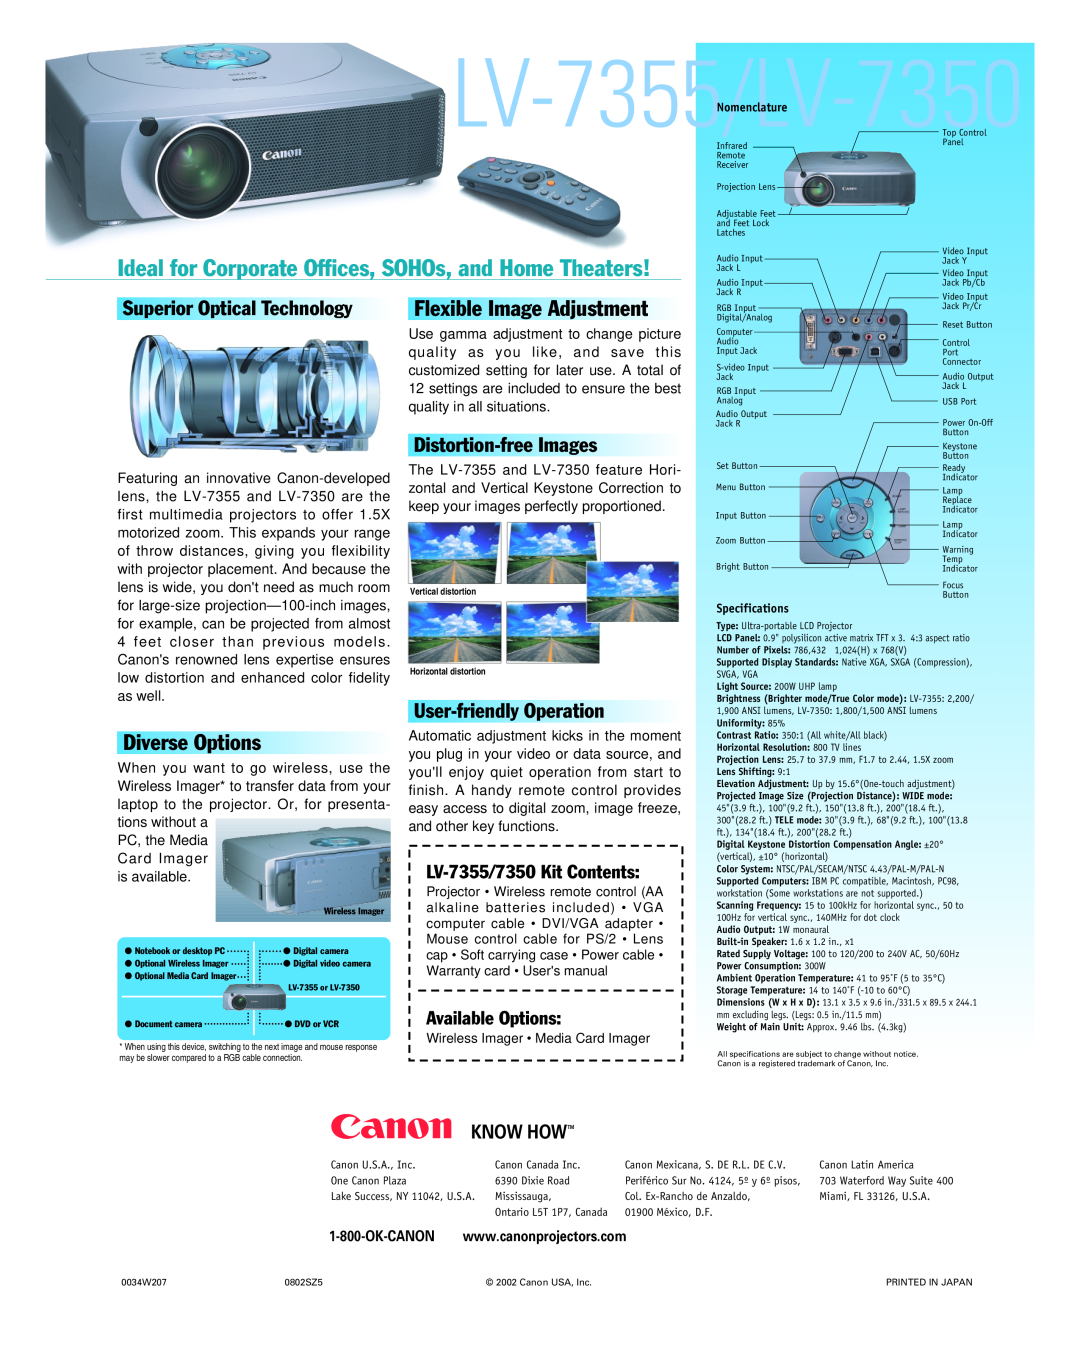 Canon LV-7350 Know Howtm, LV-7355/LVInfrared-7350, Ideal for Corporate Offices, SOHOs, and Home Theaters, Diverse Options 